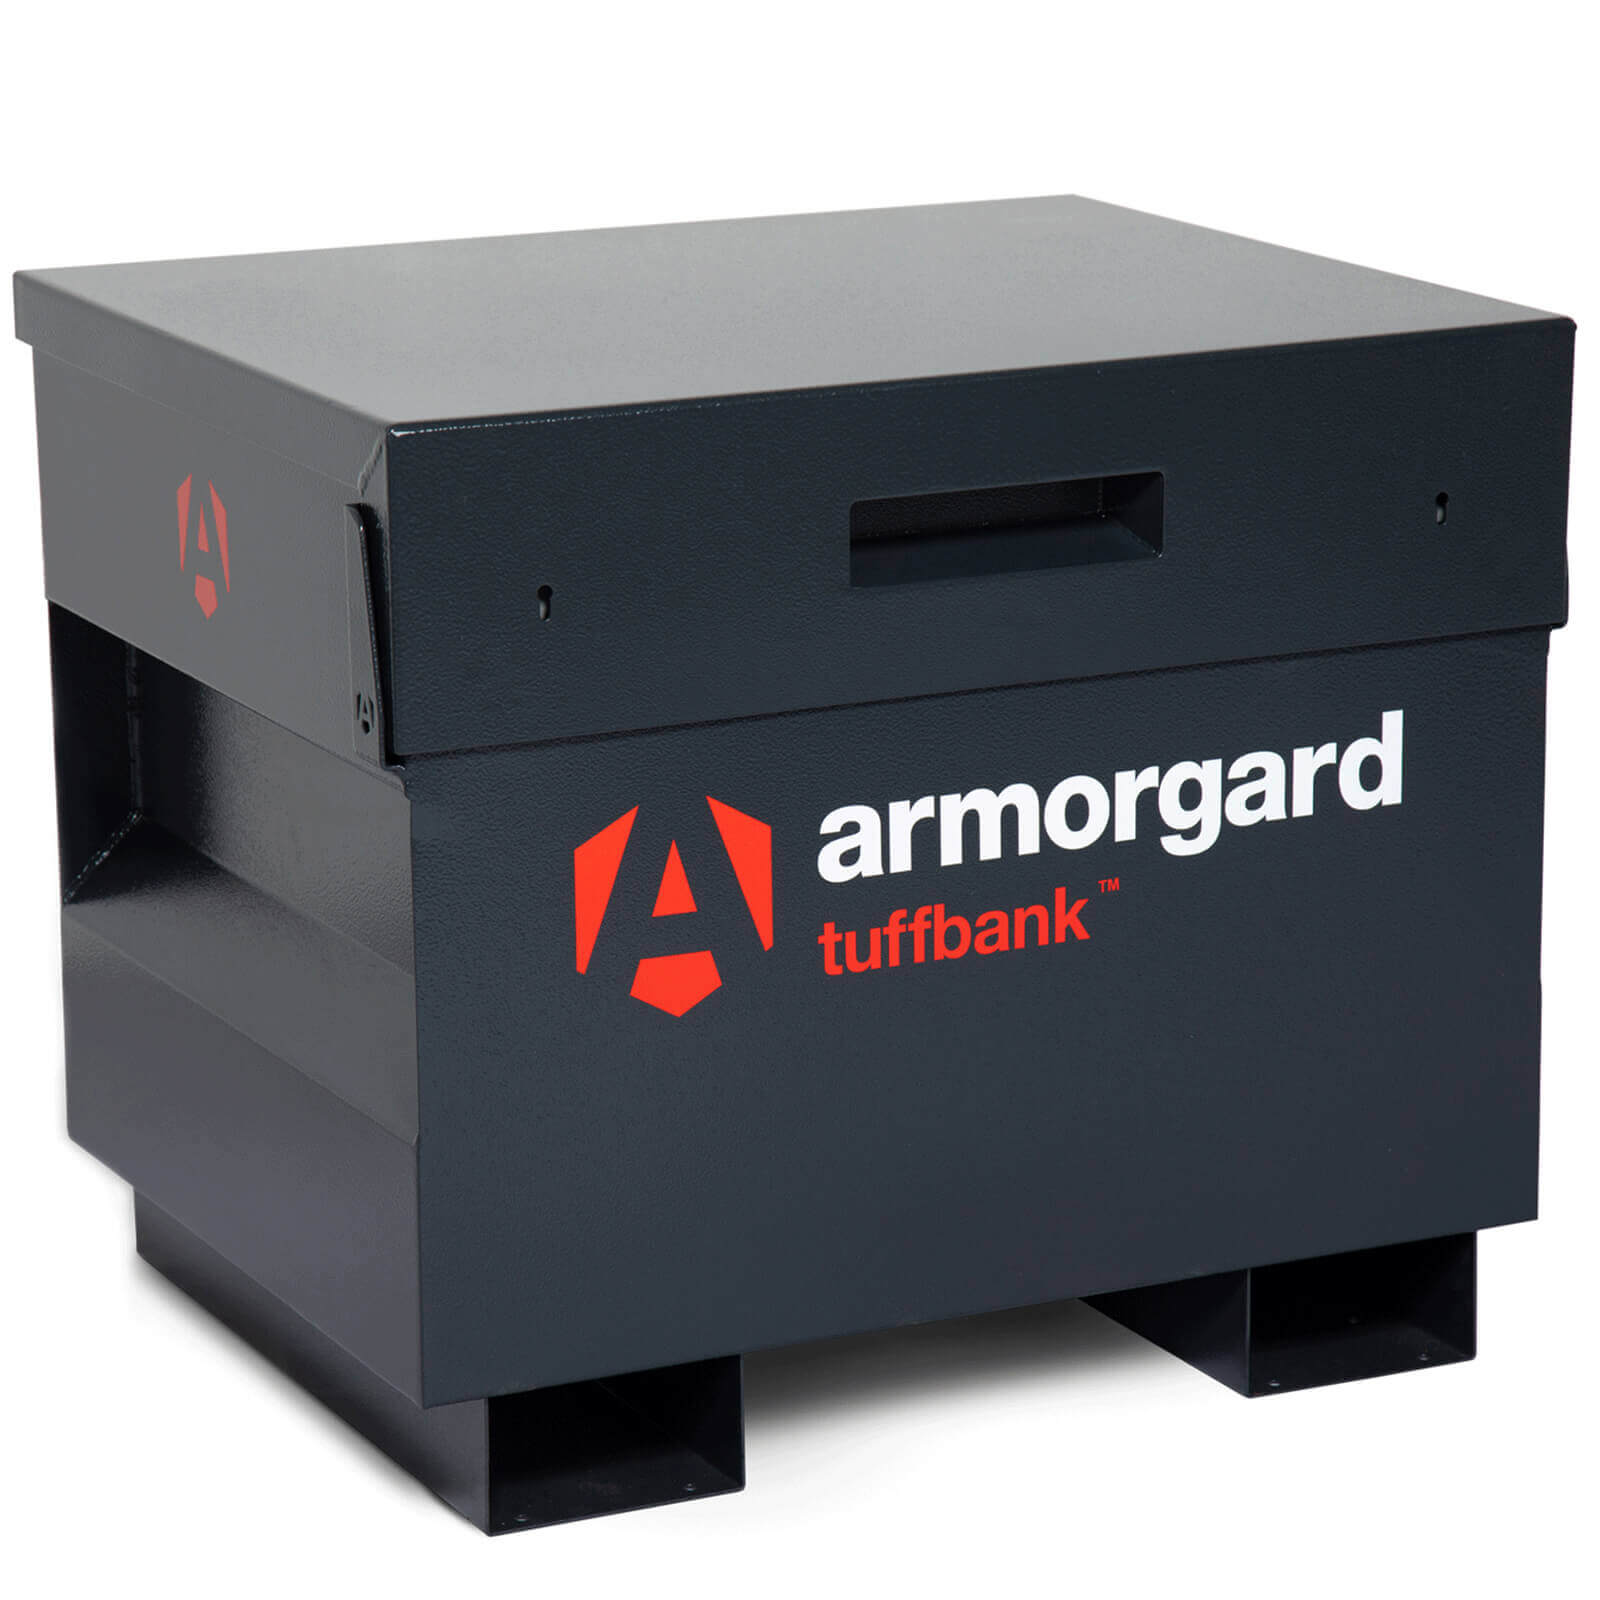 Image of Armorgard Tuffbank Secure Site Storage Chest 765mm 675mm 670mm